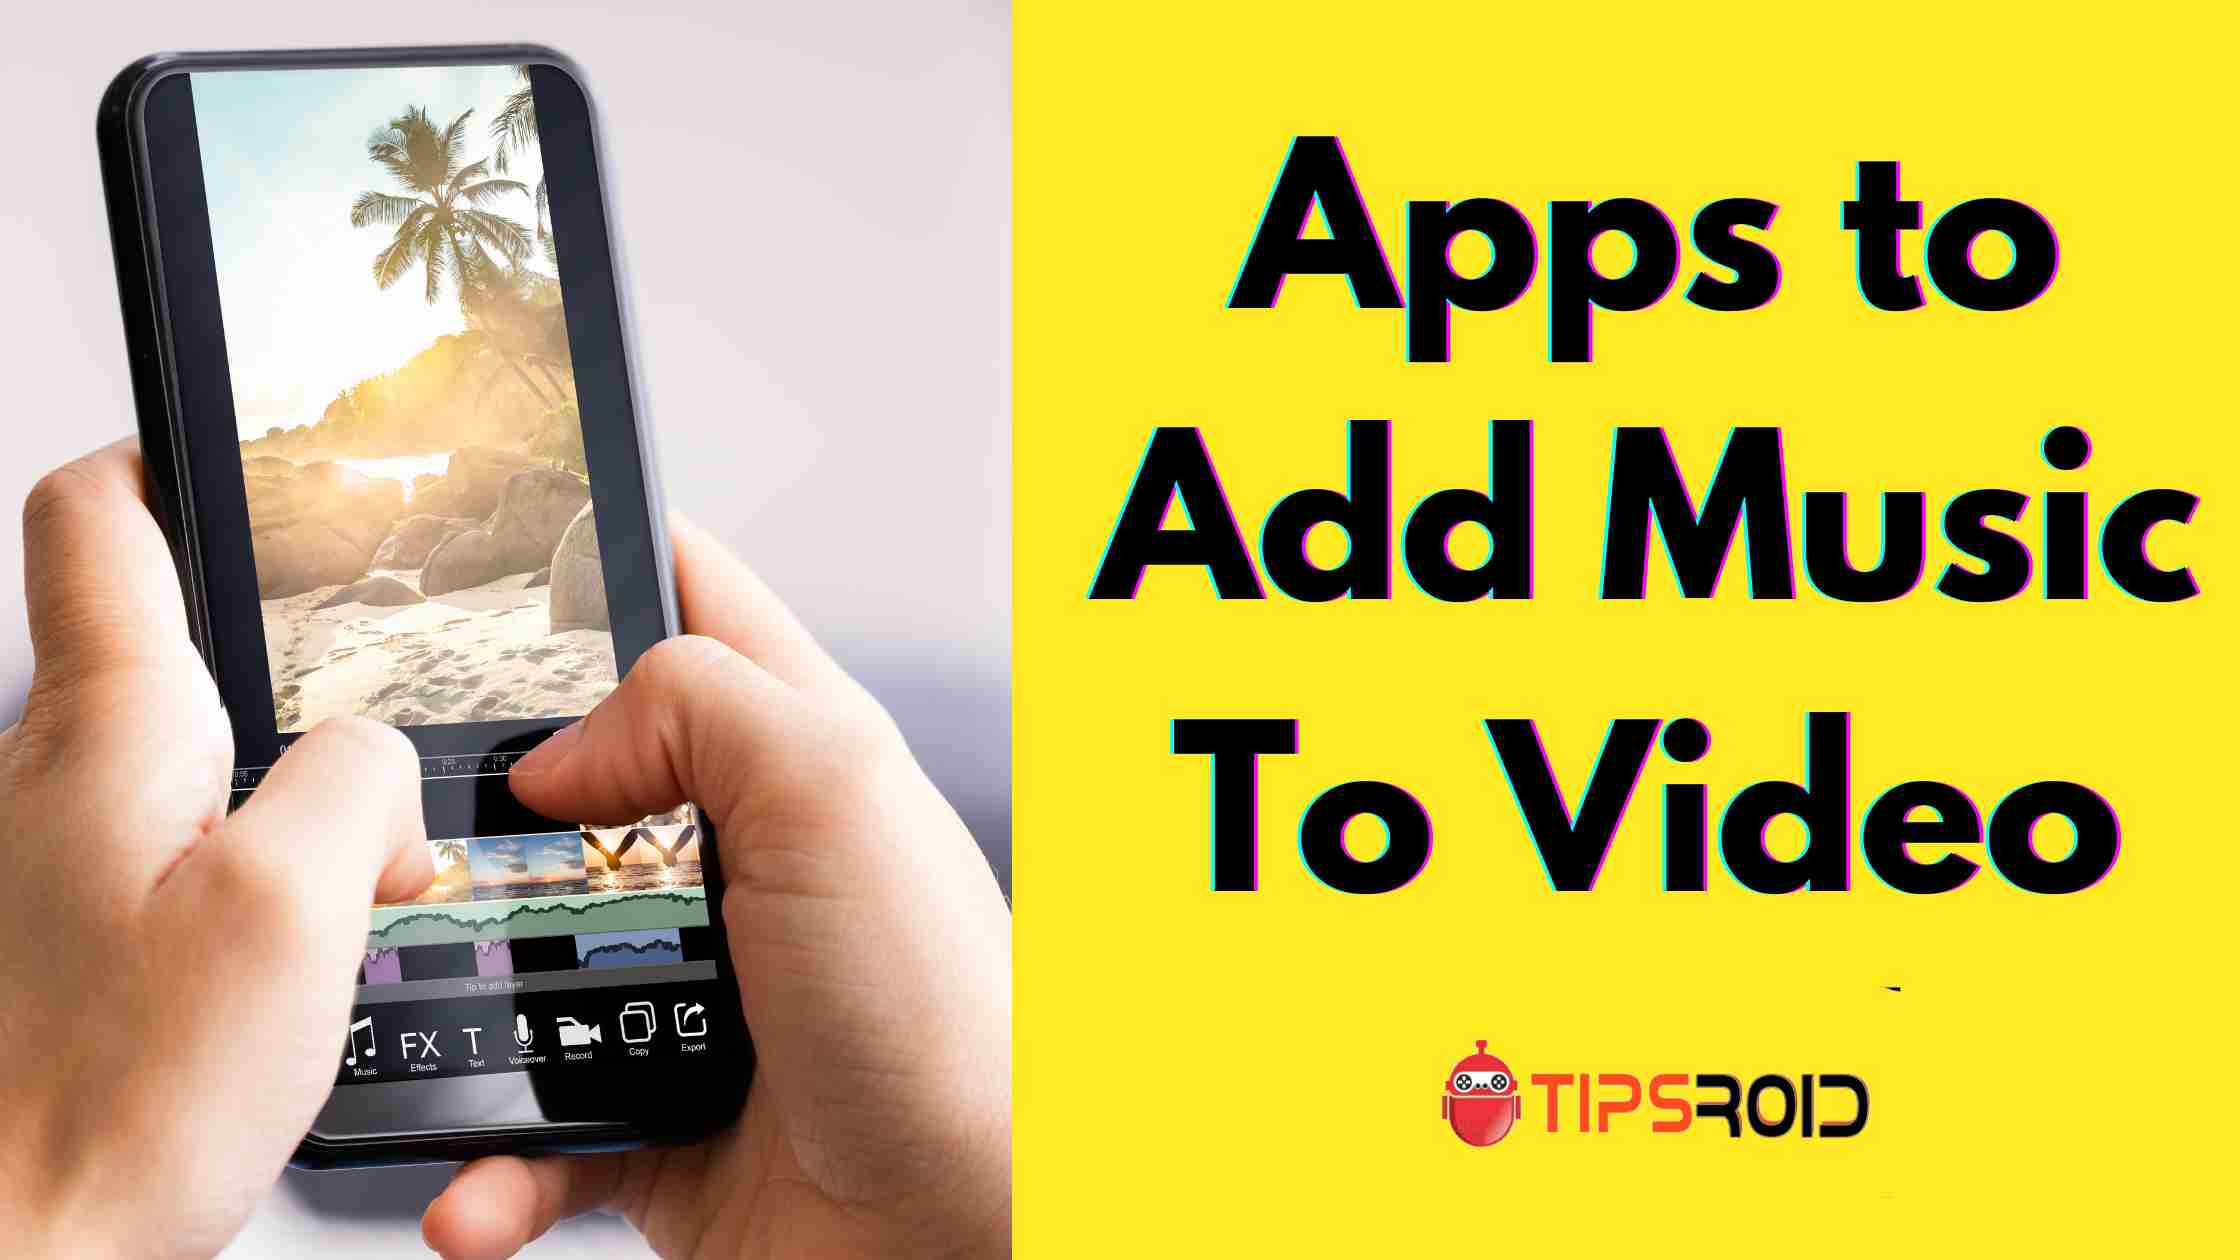 Apps to Add Music To Video